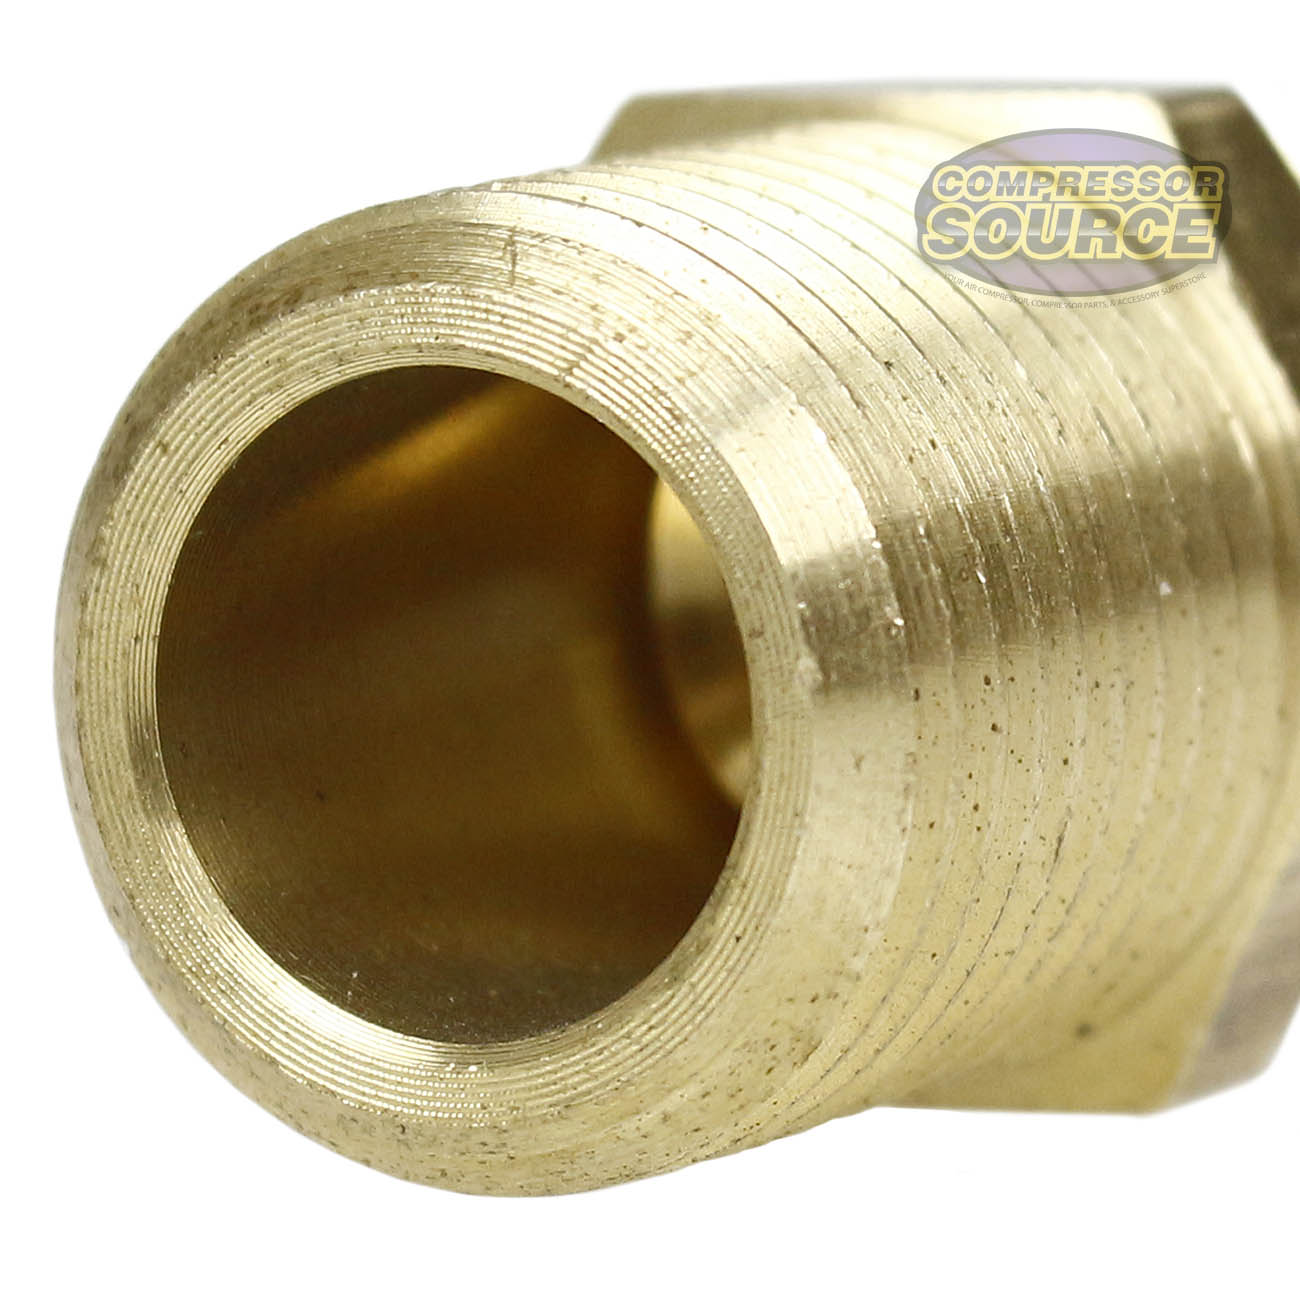 1/2" x 1/2" Brass Male Adapter Straight Connector for Flared Tubing 10269-5Pack